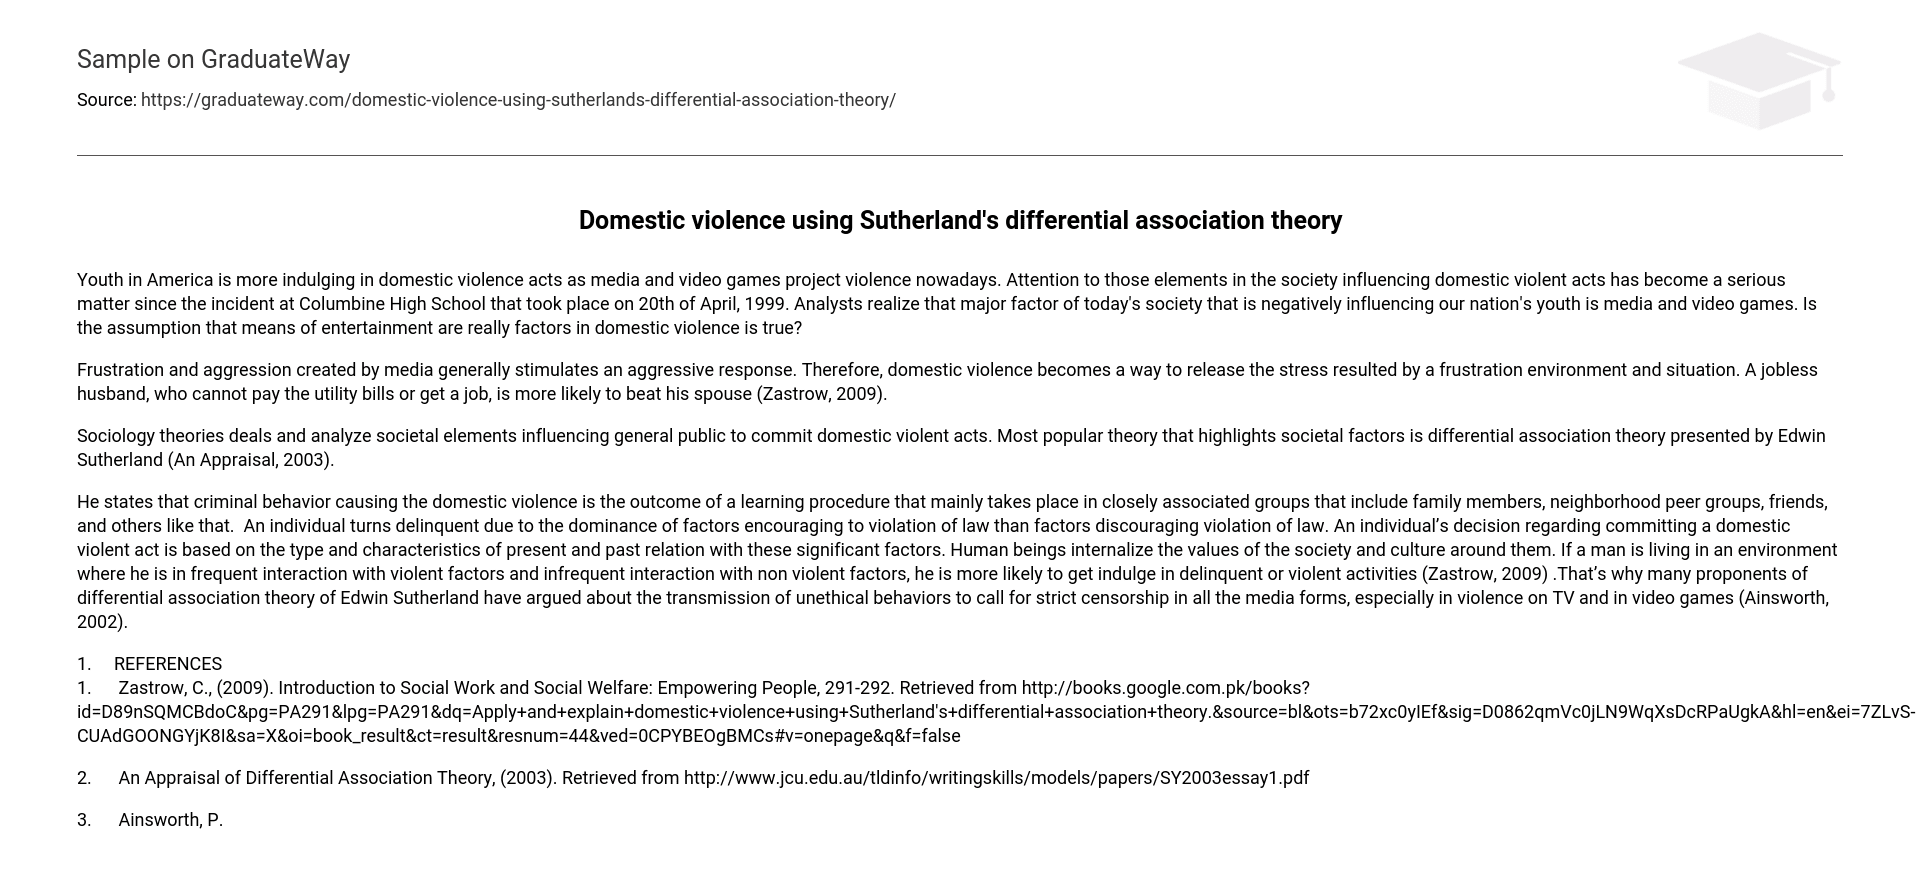 Domestic violence using Sutherland’s differential association theory